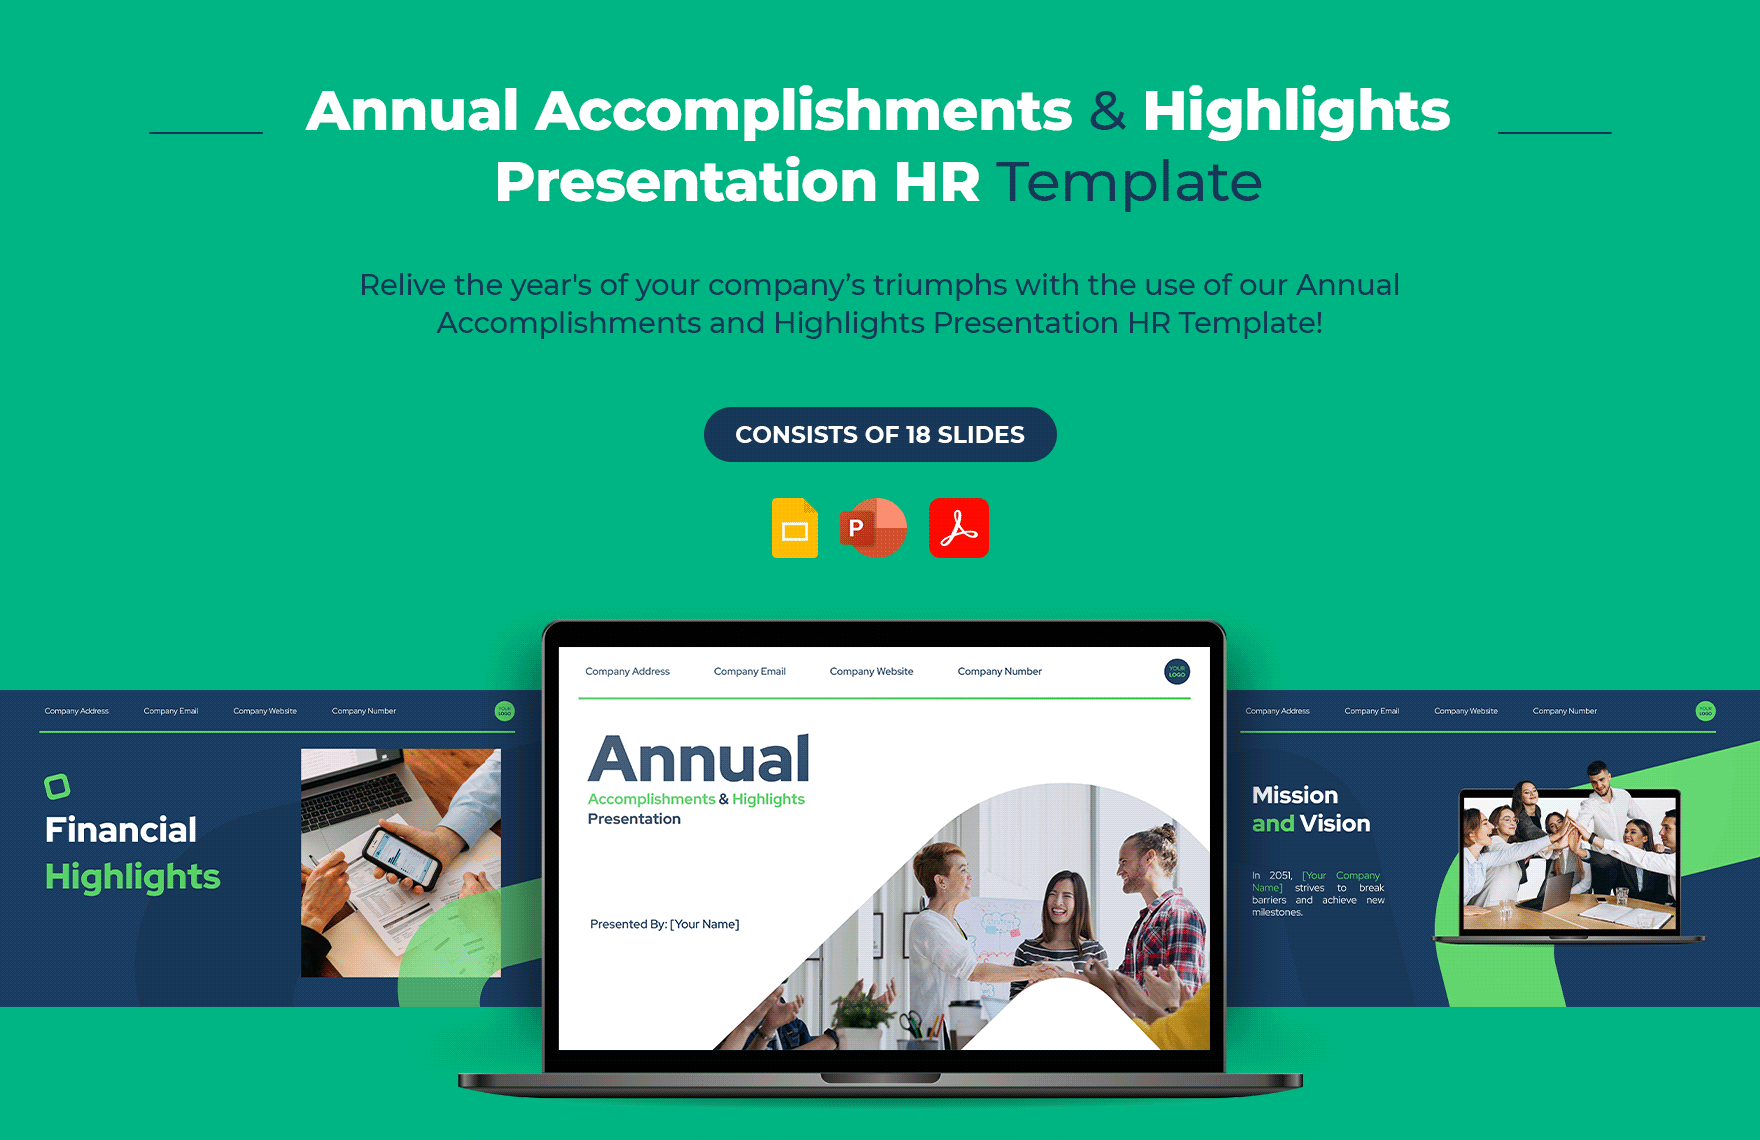 Annual Accomplishments and Highlights Presentation HR Template